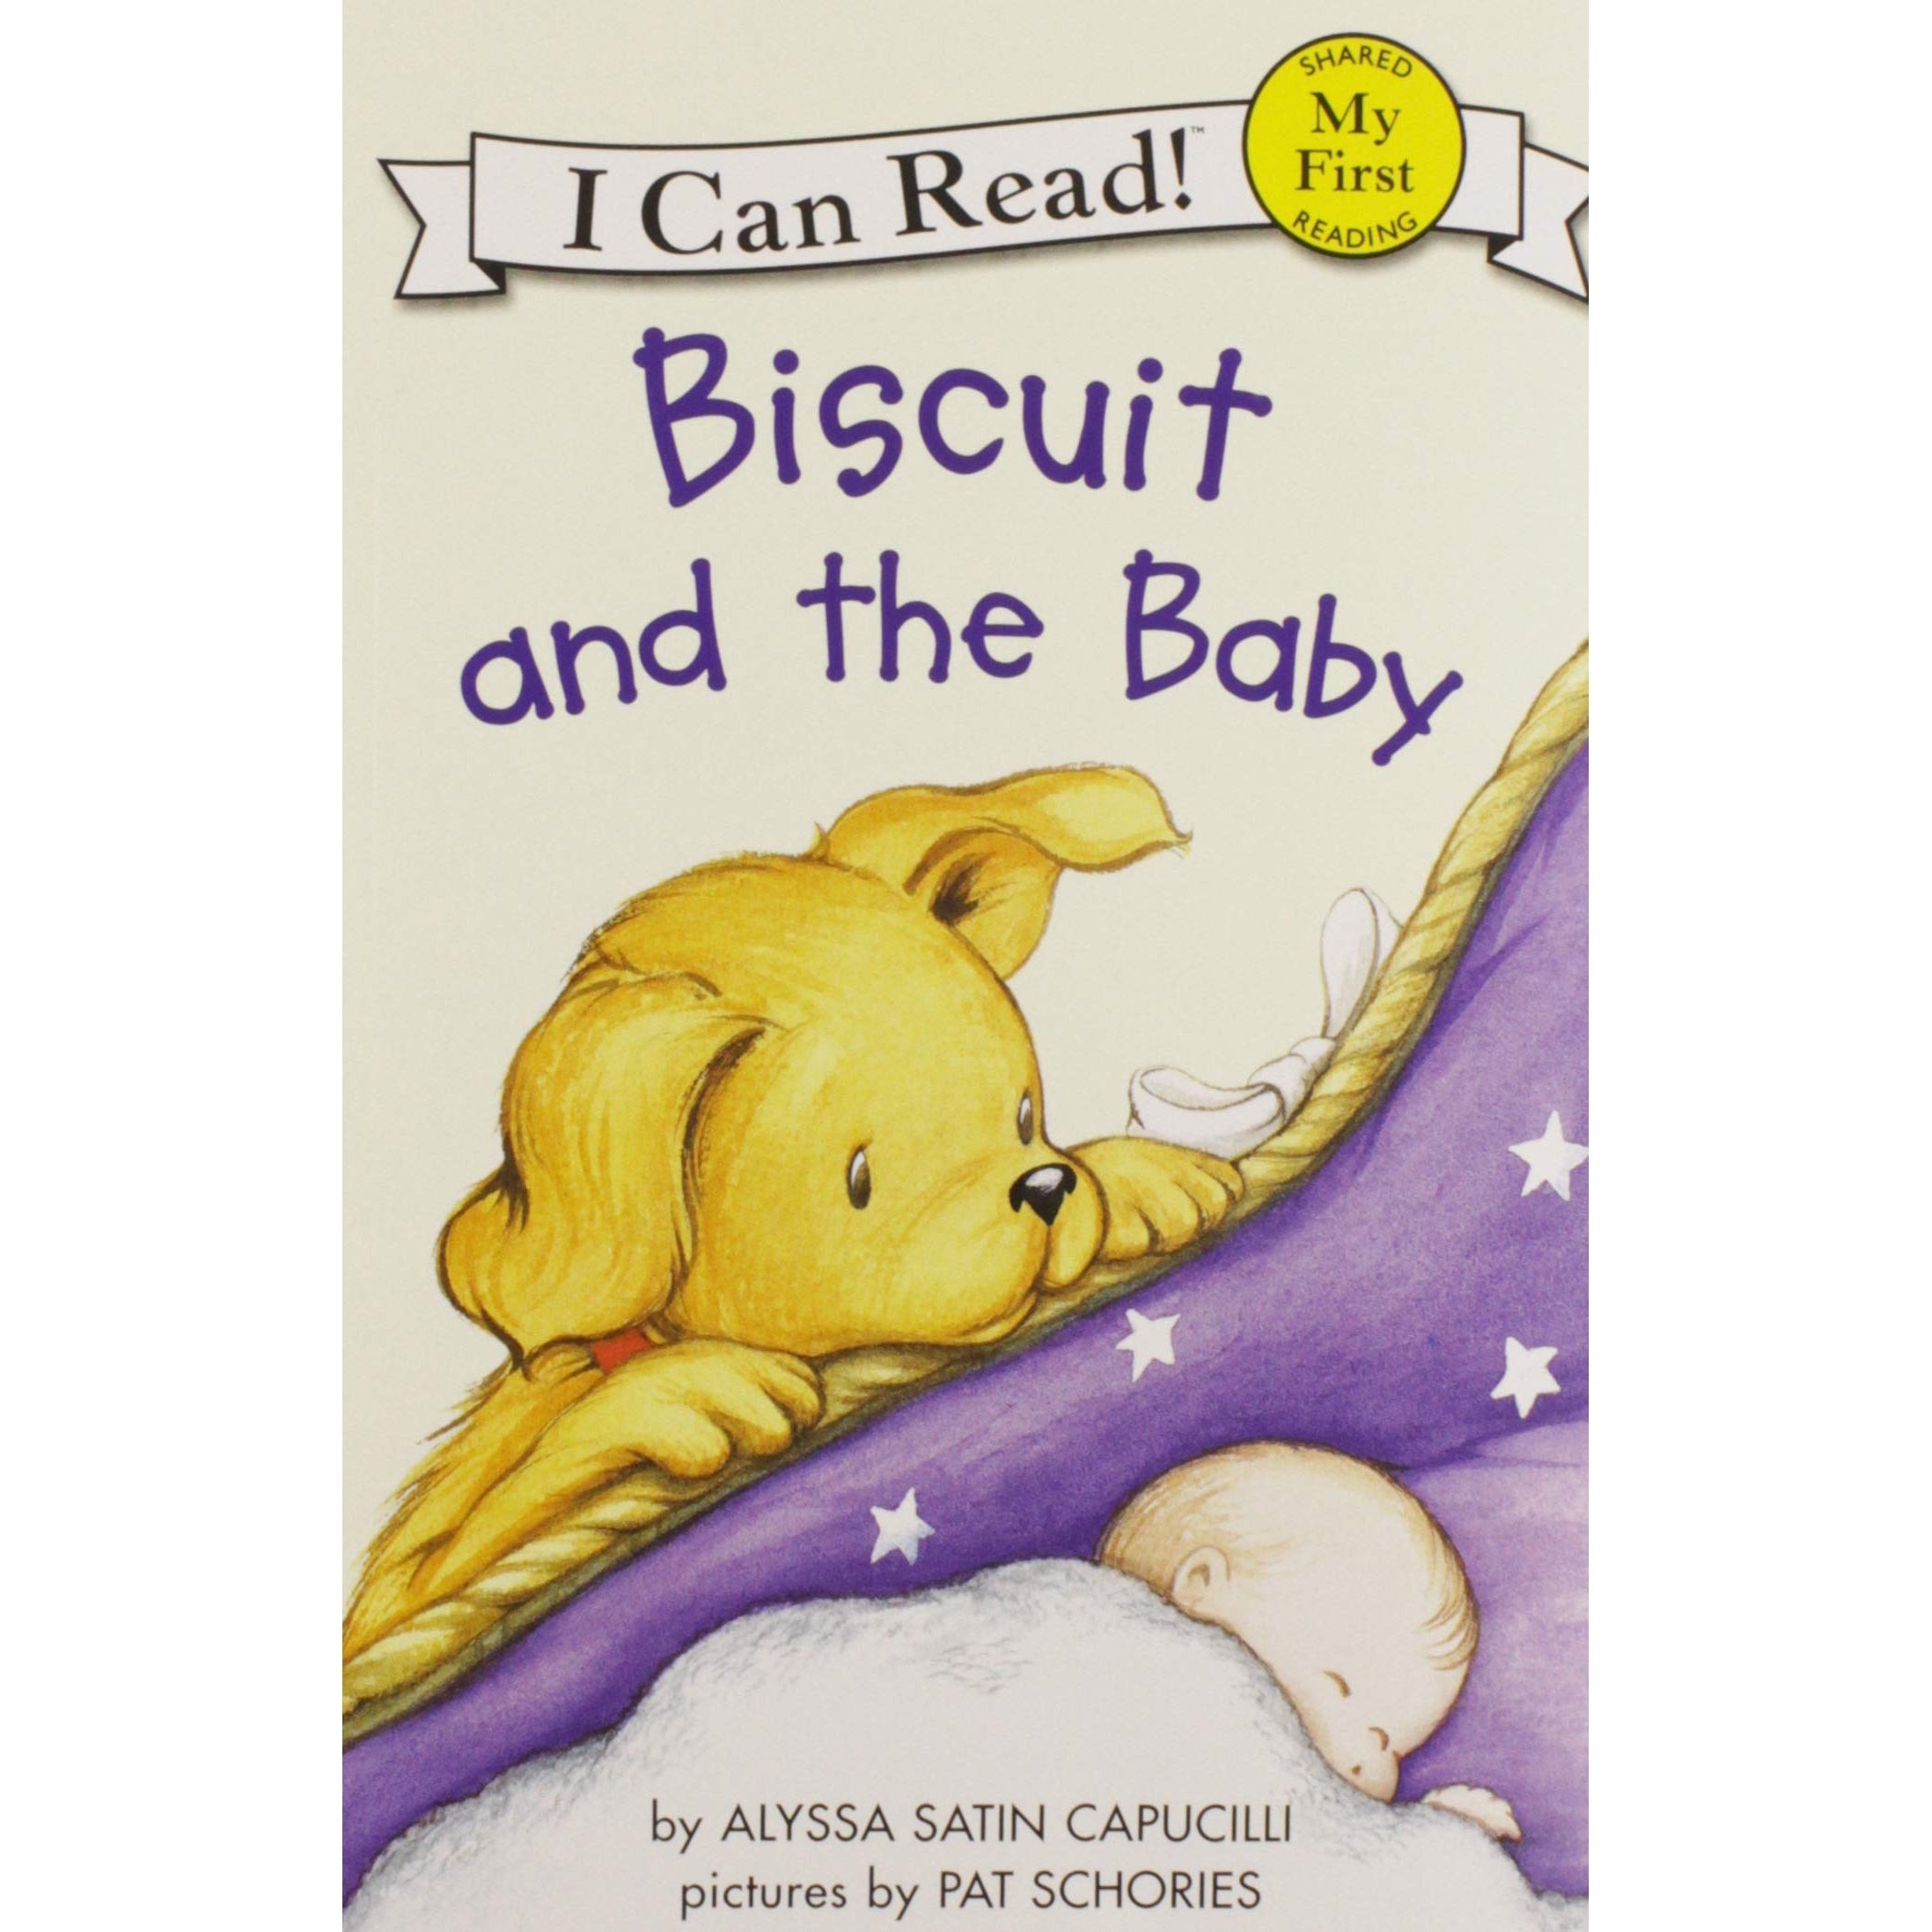 Harper Collins: My First I Can Read: Biscuit and the Baby-HARPER COLLINS PUBLISHERS-Little Giant Kidz